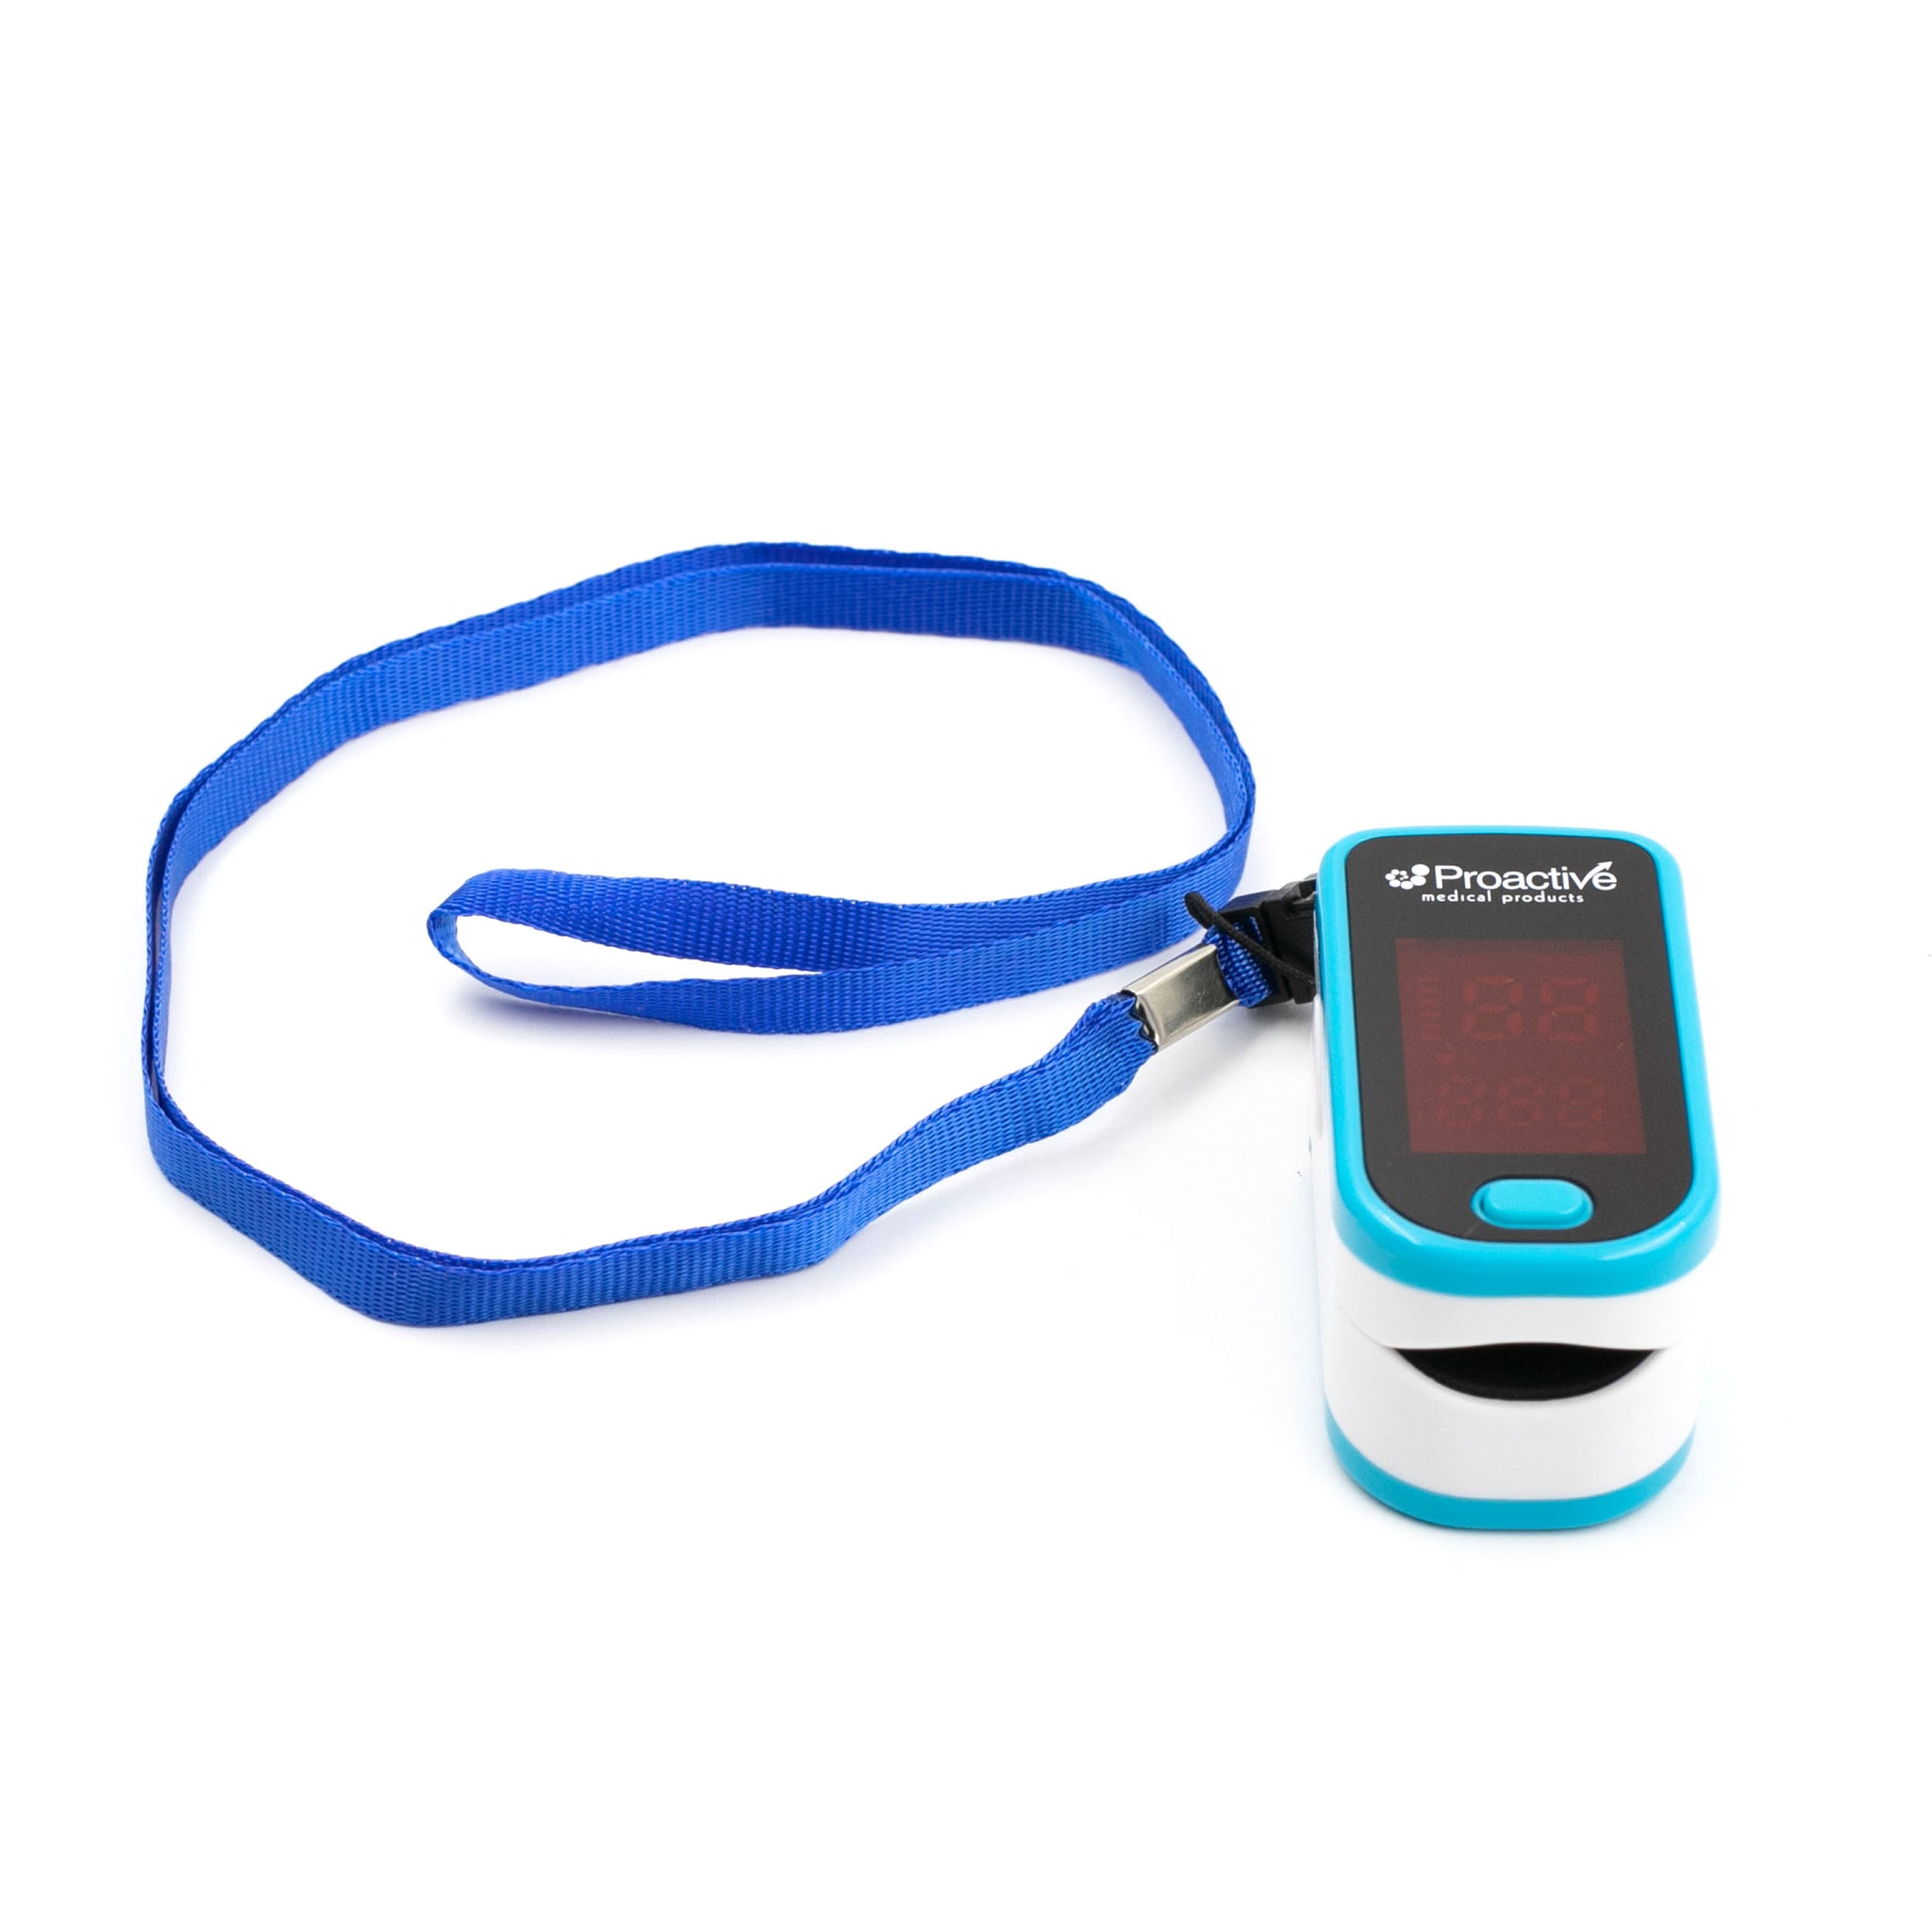 Proactive Medical Products Fingertip Pulse Oximeter 1 Each 20110